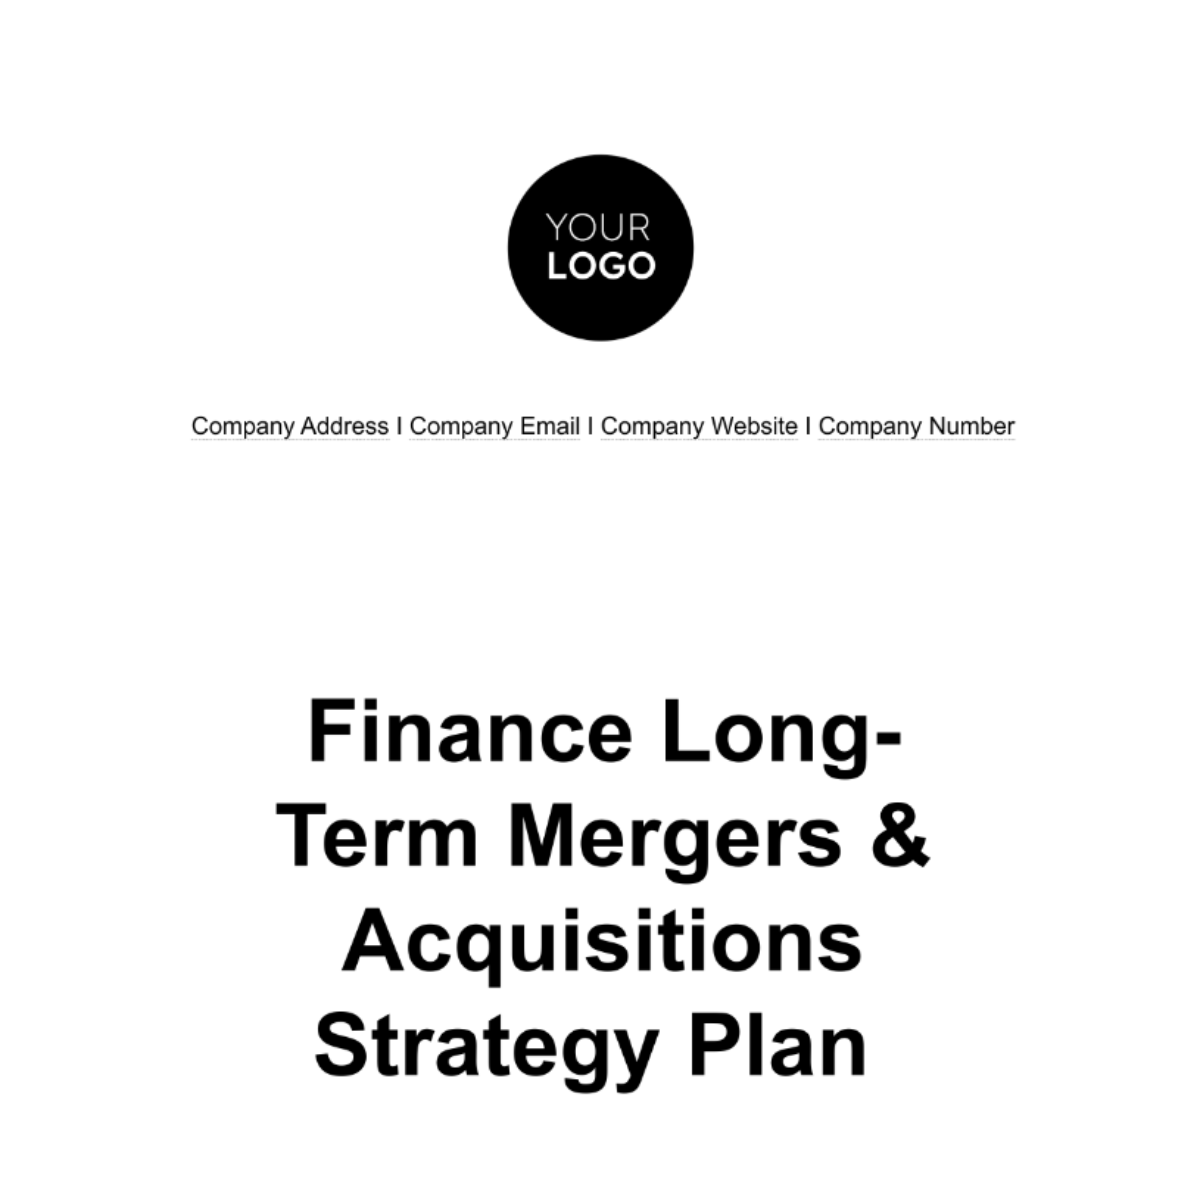 Free Finance Long-Term Mergers & Acquisitions Strategy Plan Template